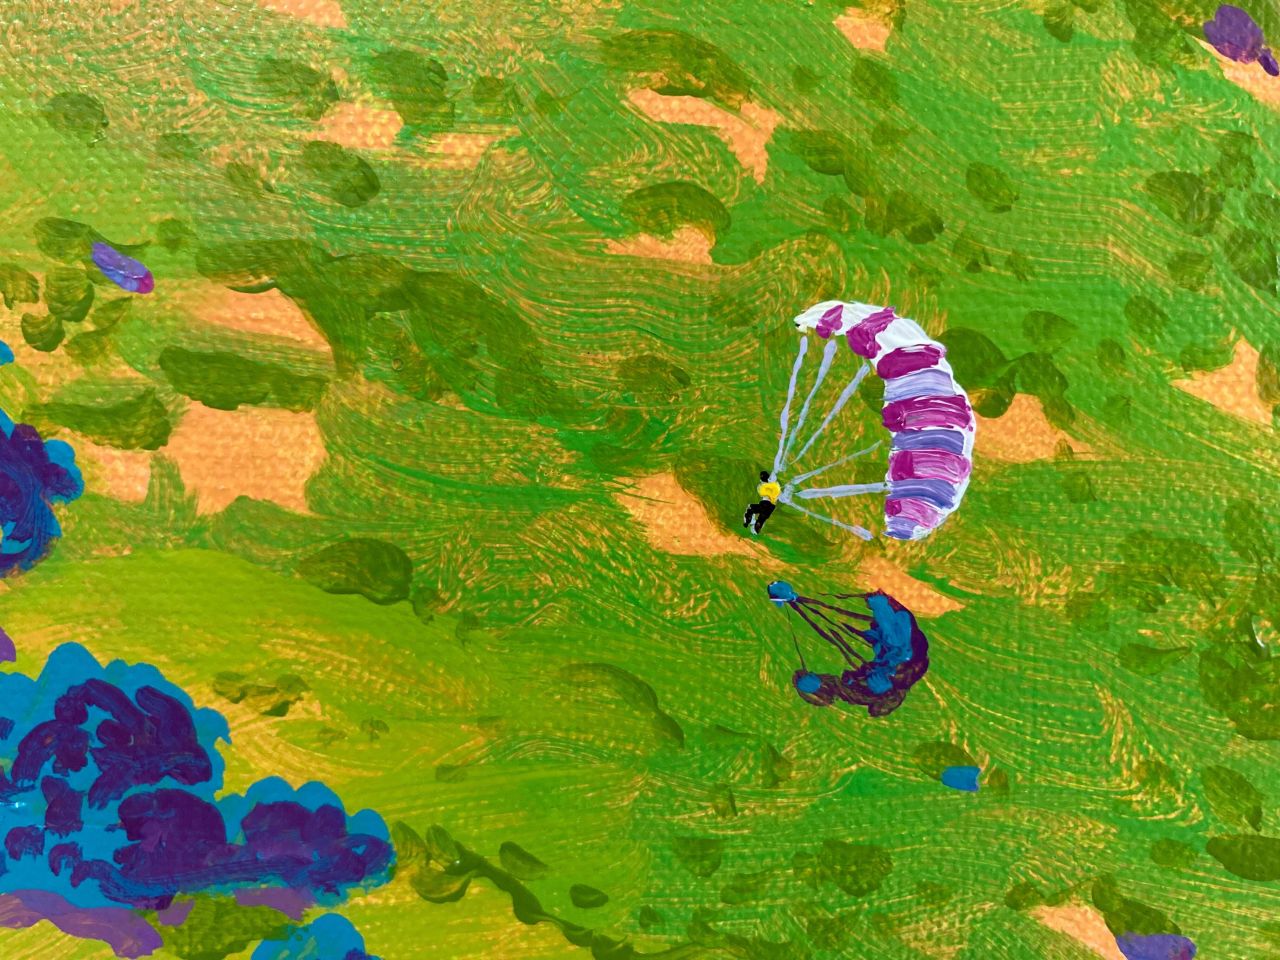 In his paintings, people can be seen doing outdoor activities, like hiking and, in this detail, parachuting.